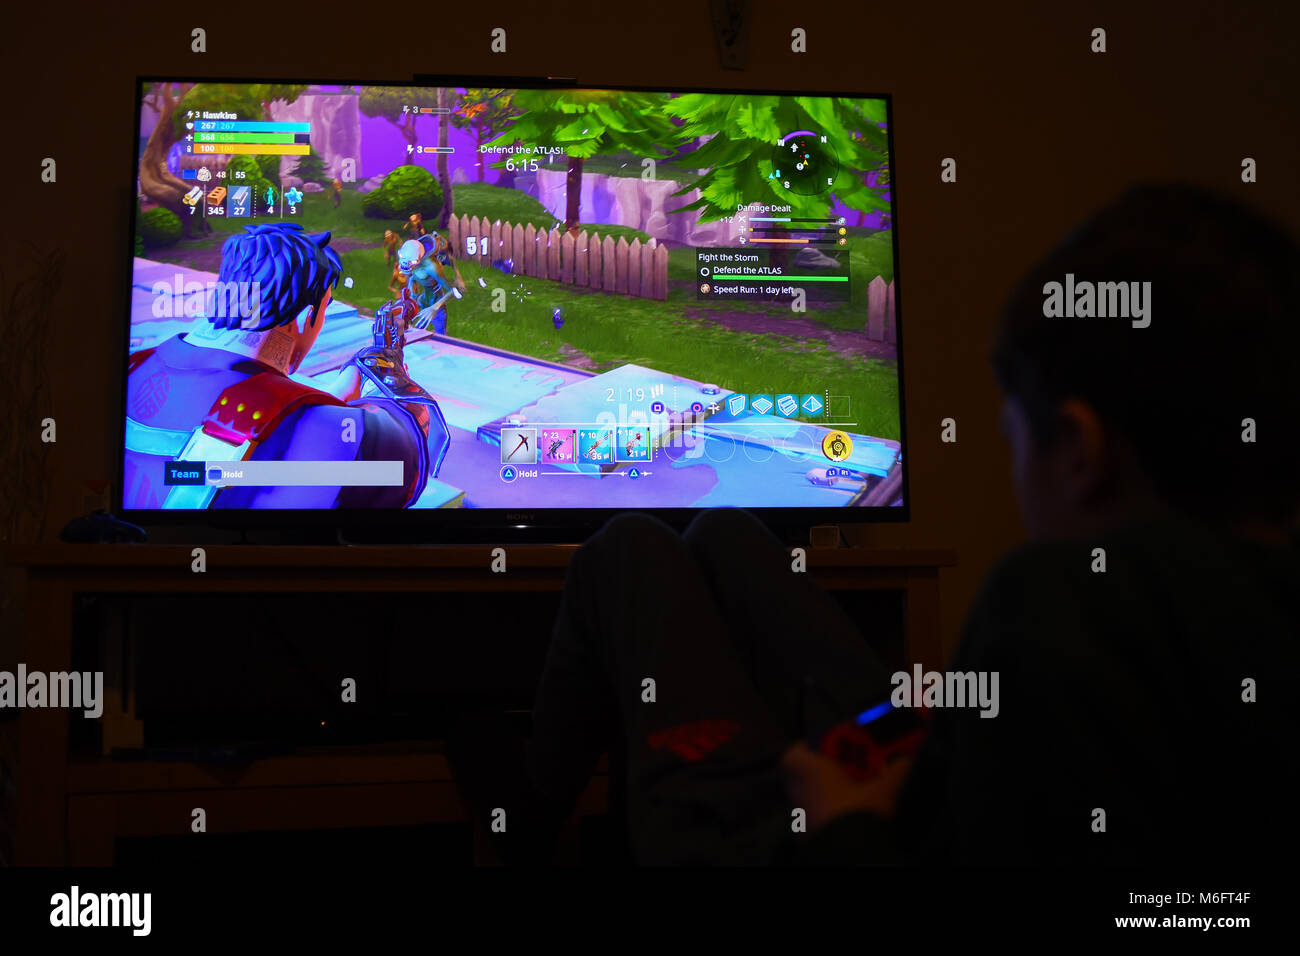 A young boy plays the computer game Fortnite on a PS4 in a darkened room on a large TV. Stock Photo